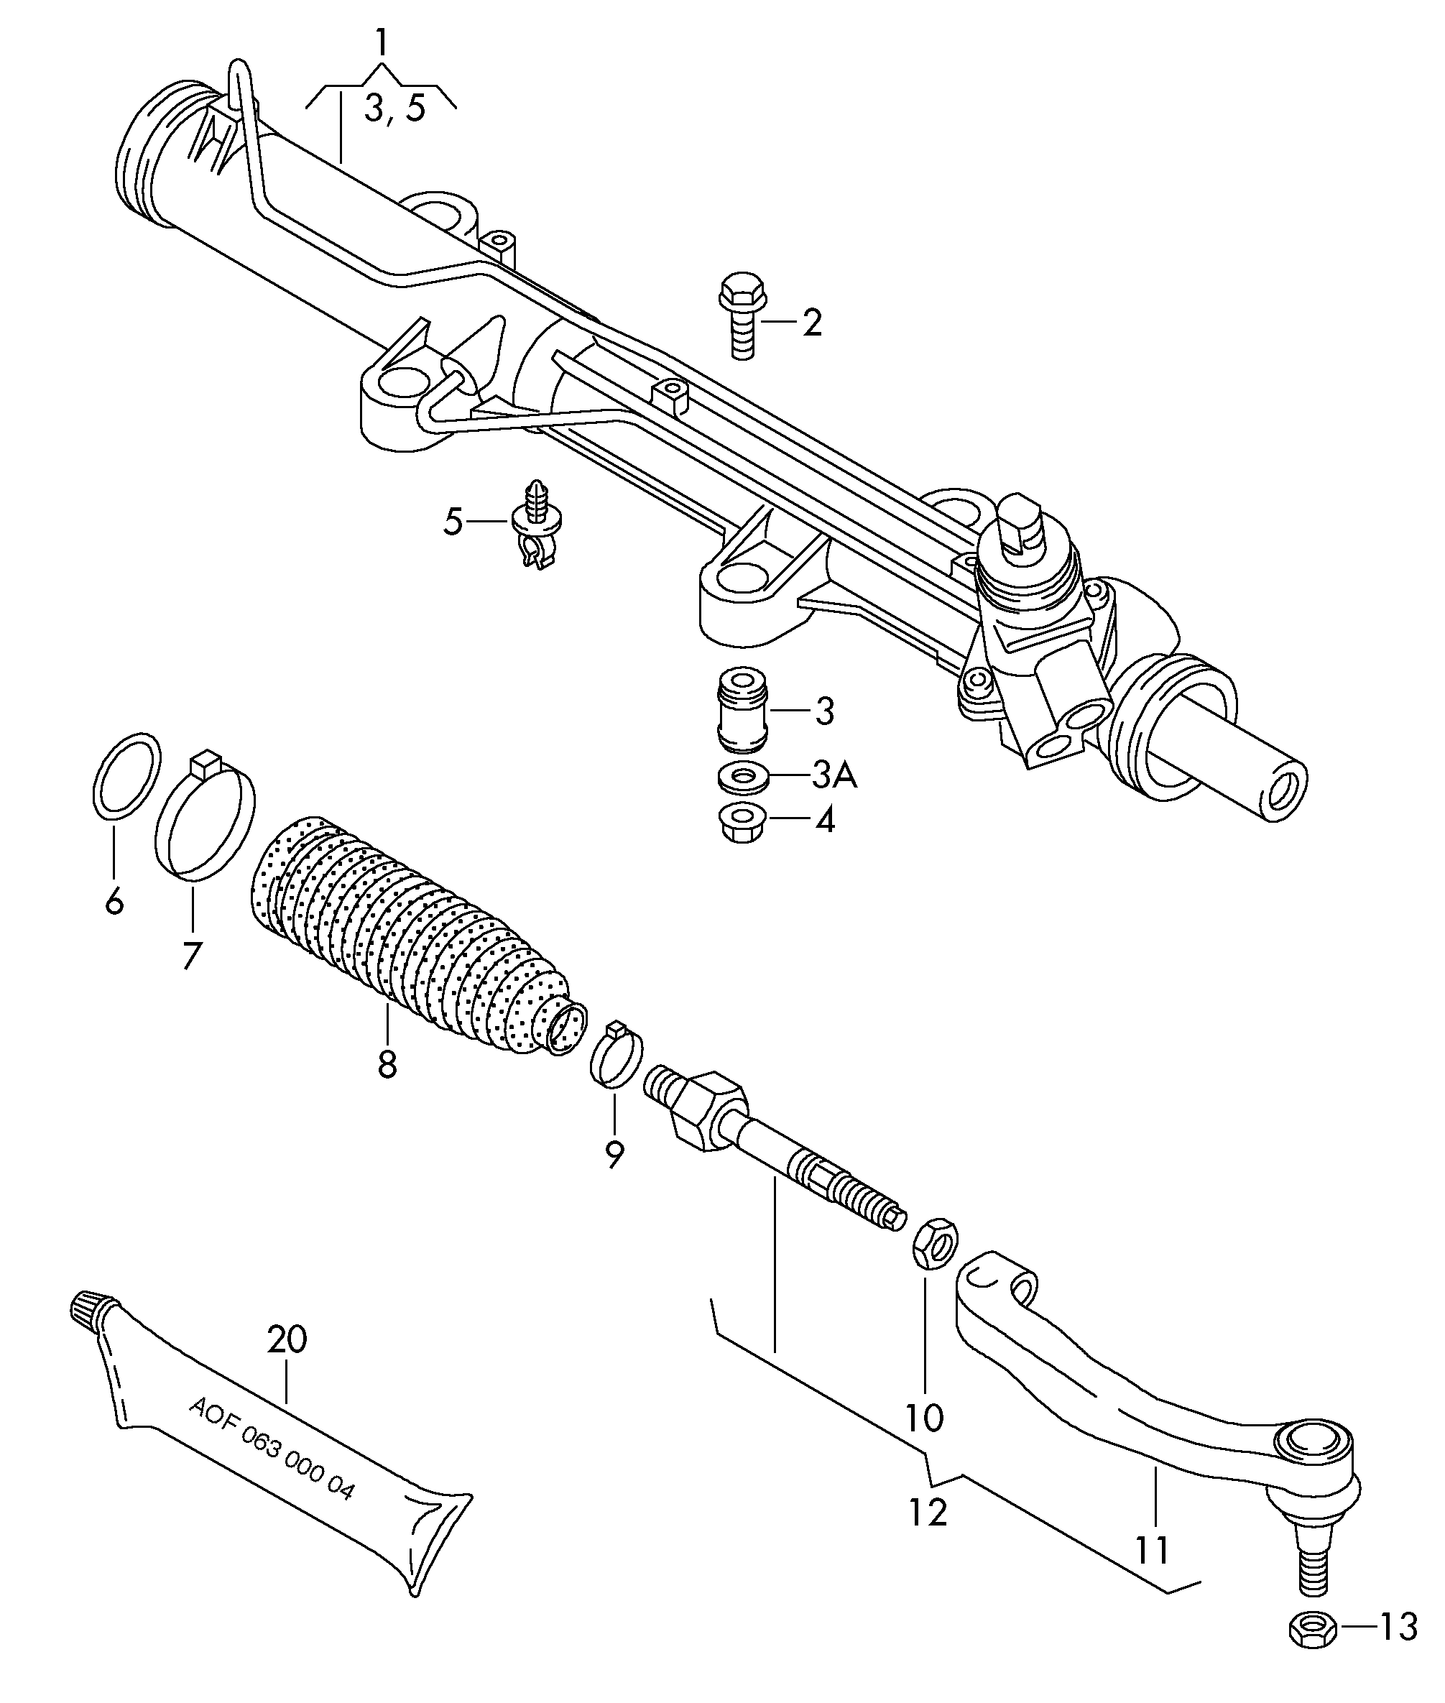 422-040 T5 steering gear; track rod/ends/boots - Transporter ‘Please select parts from links below, prices will update’